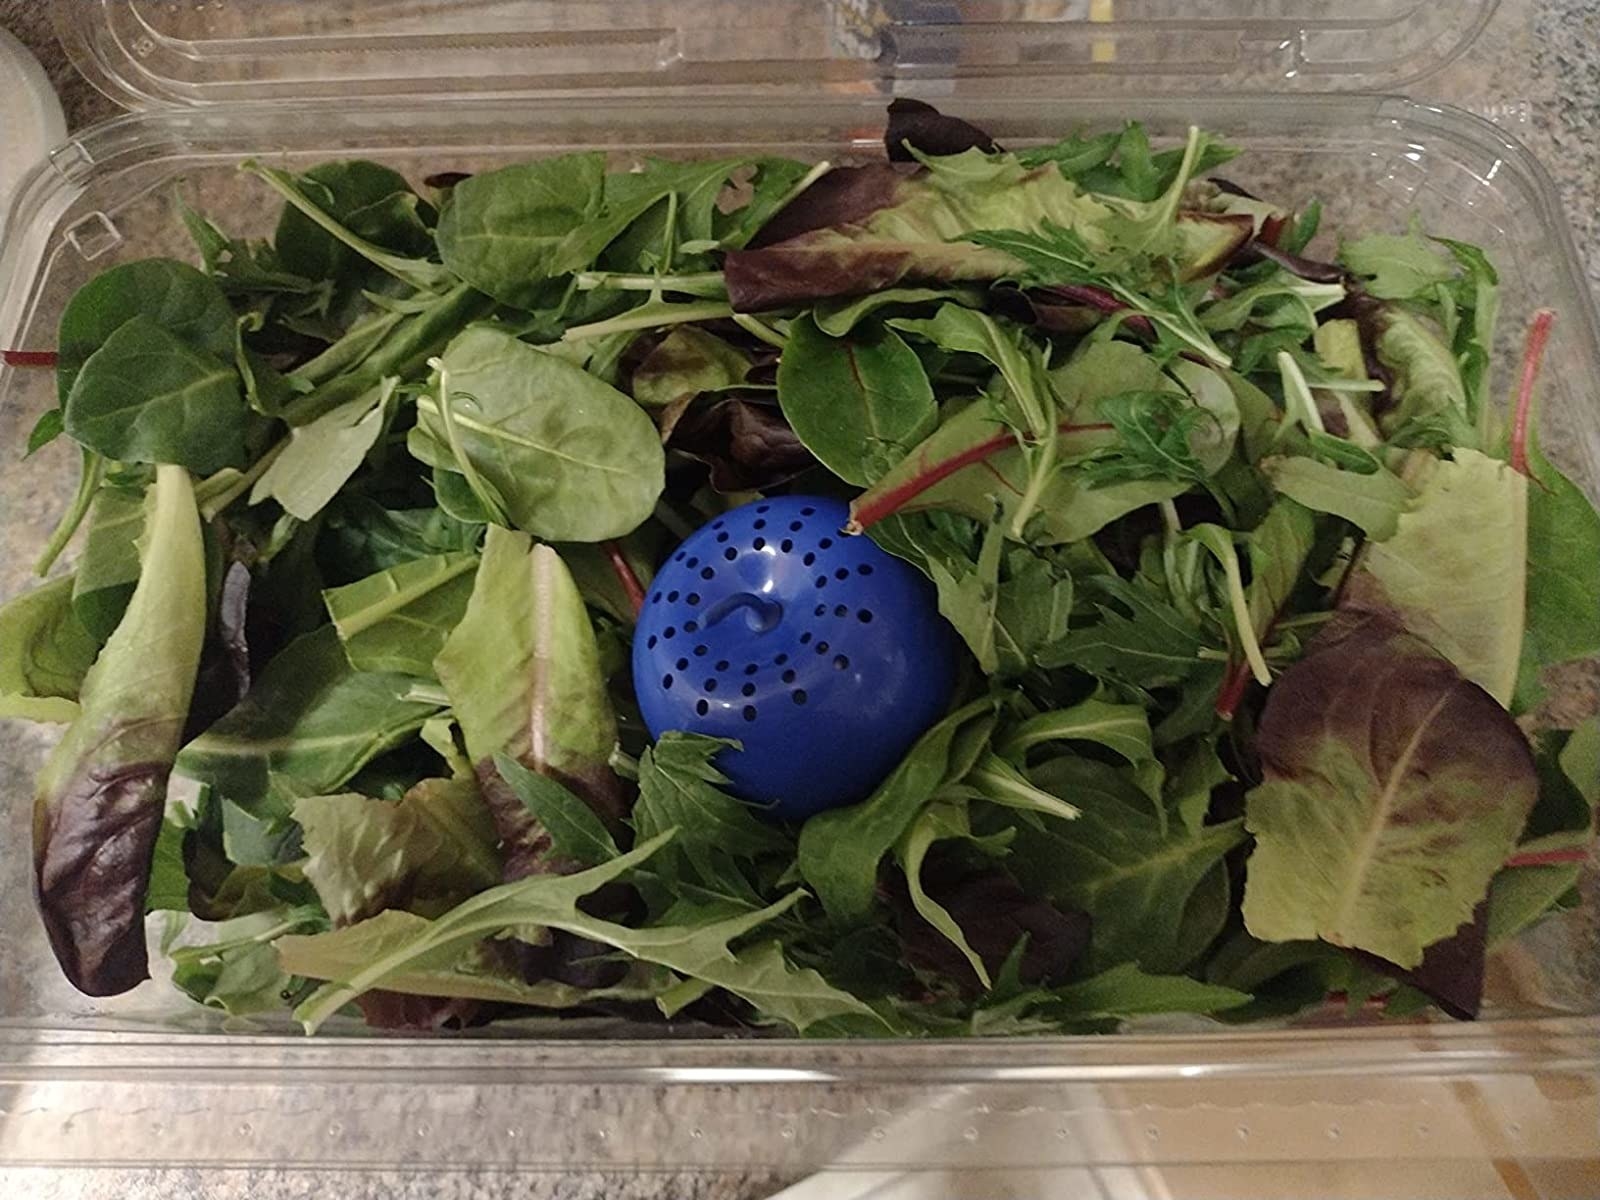 Reviewer image of blue apple in a container of lettuce